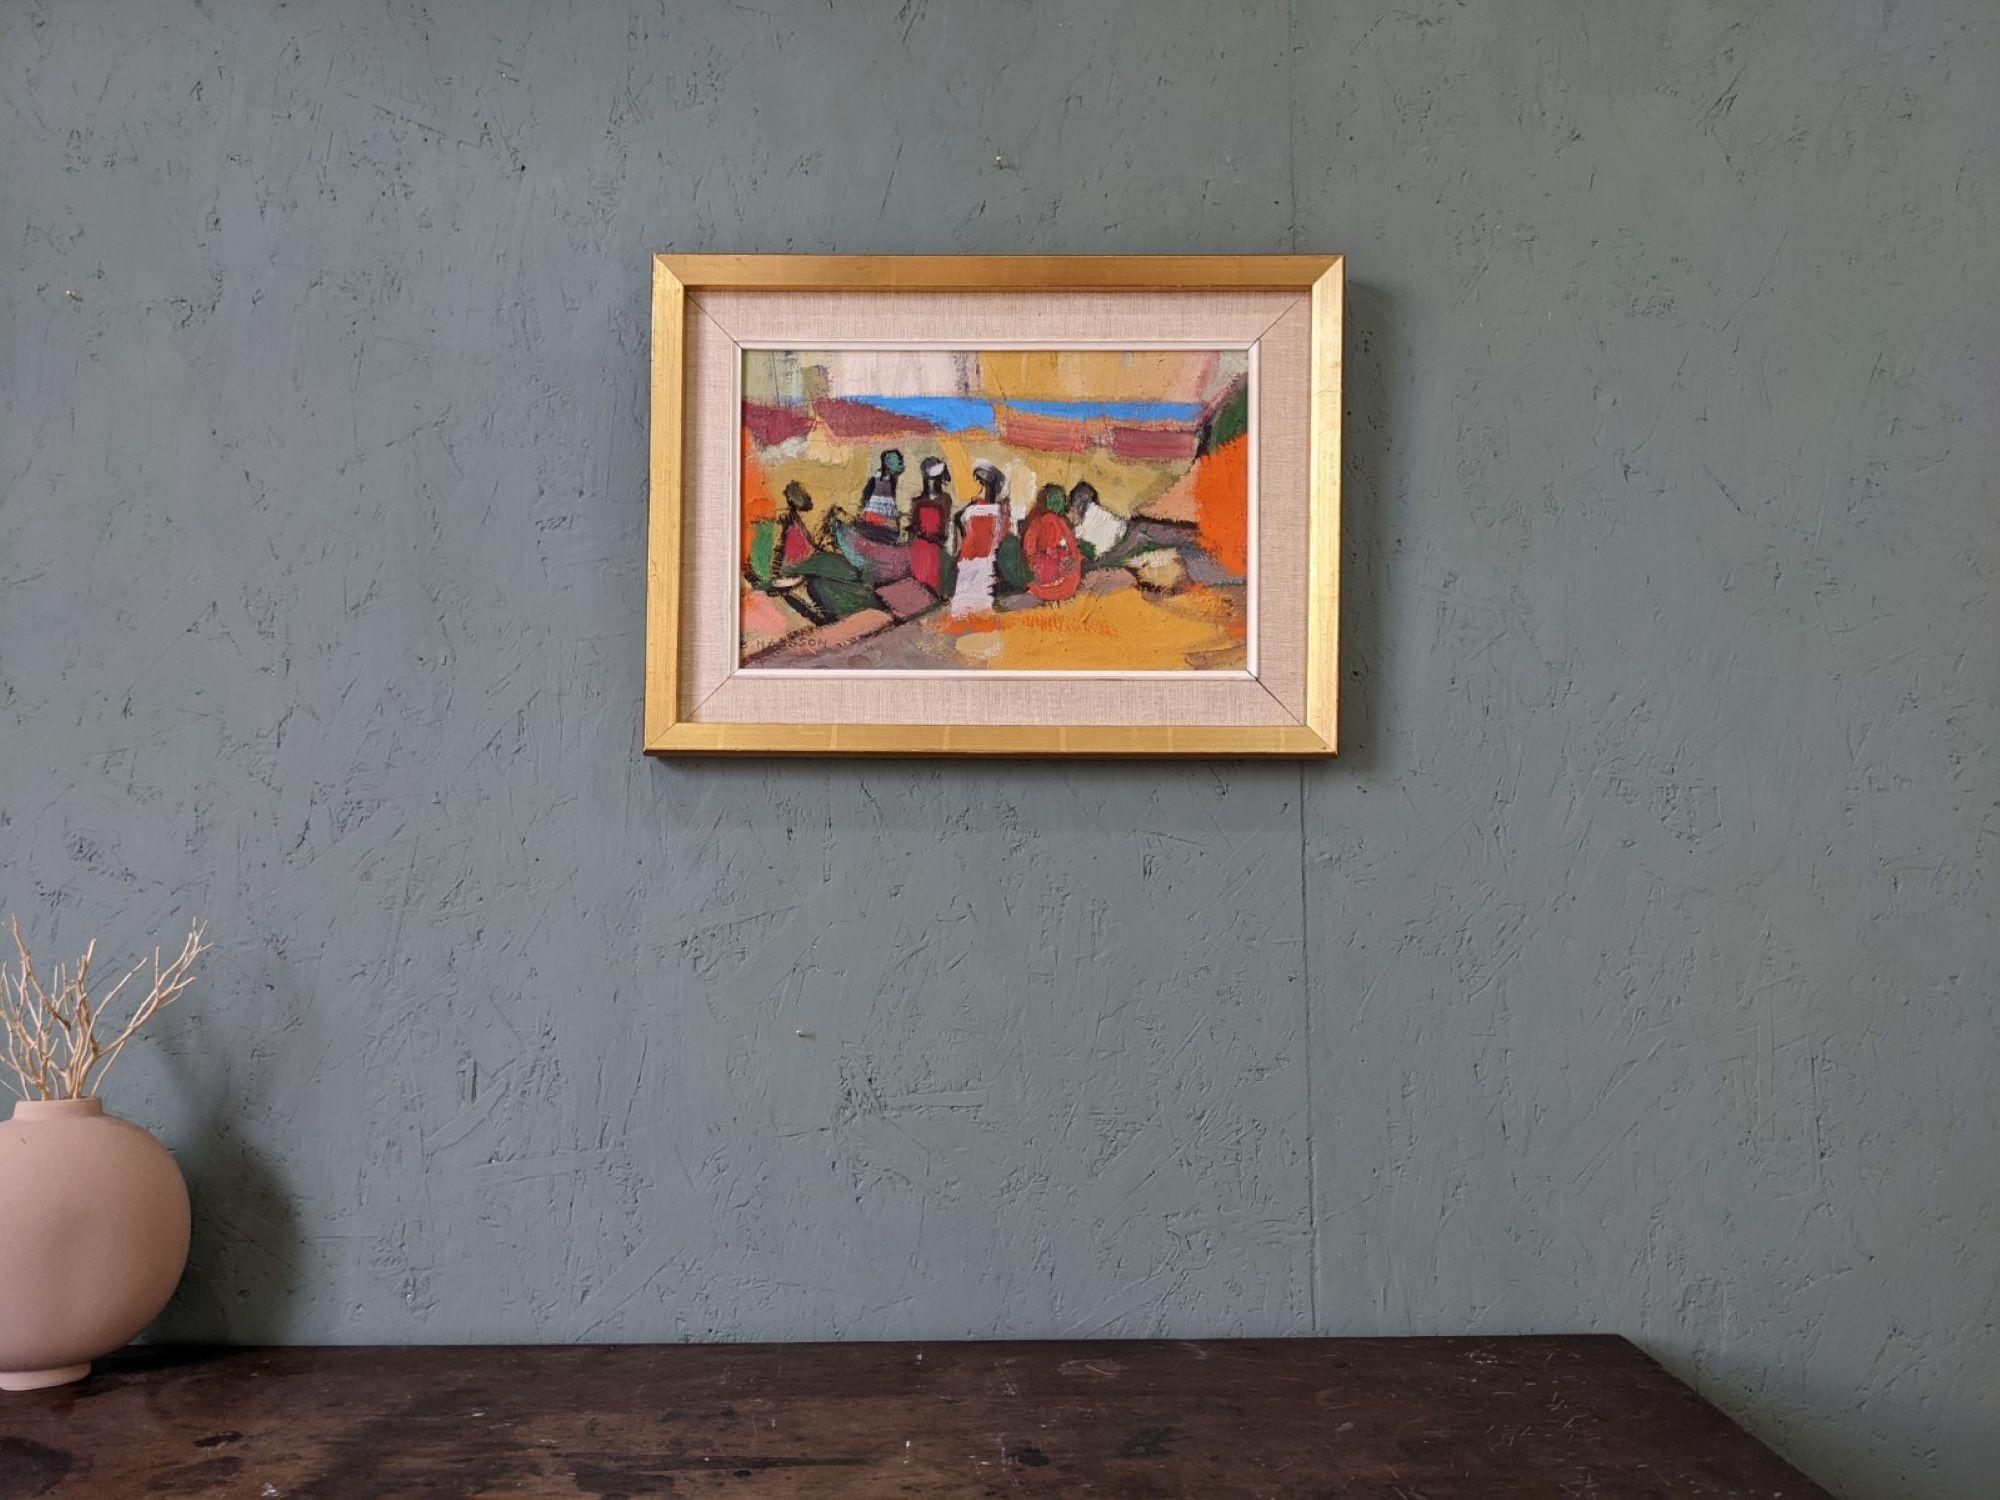 OUTING
Size: 34 x 46 cm (including frame)
Oil on canvas paper laid to board

A very lively and playful mid century modernist figure scene, painted in oil onto board by the established female Swedish artist Brita Hansson (1918-1979).

In this vivid